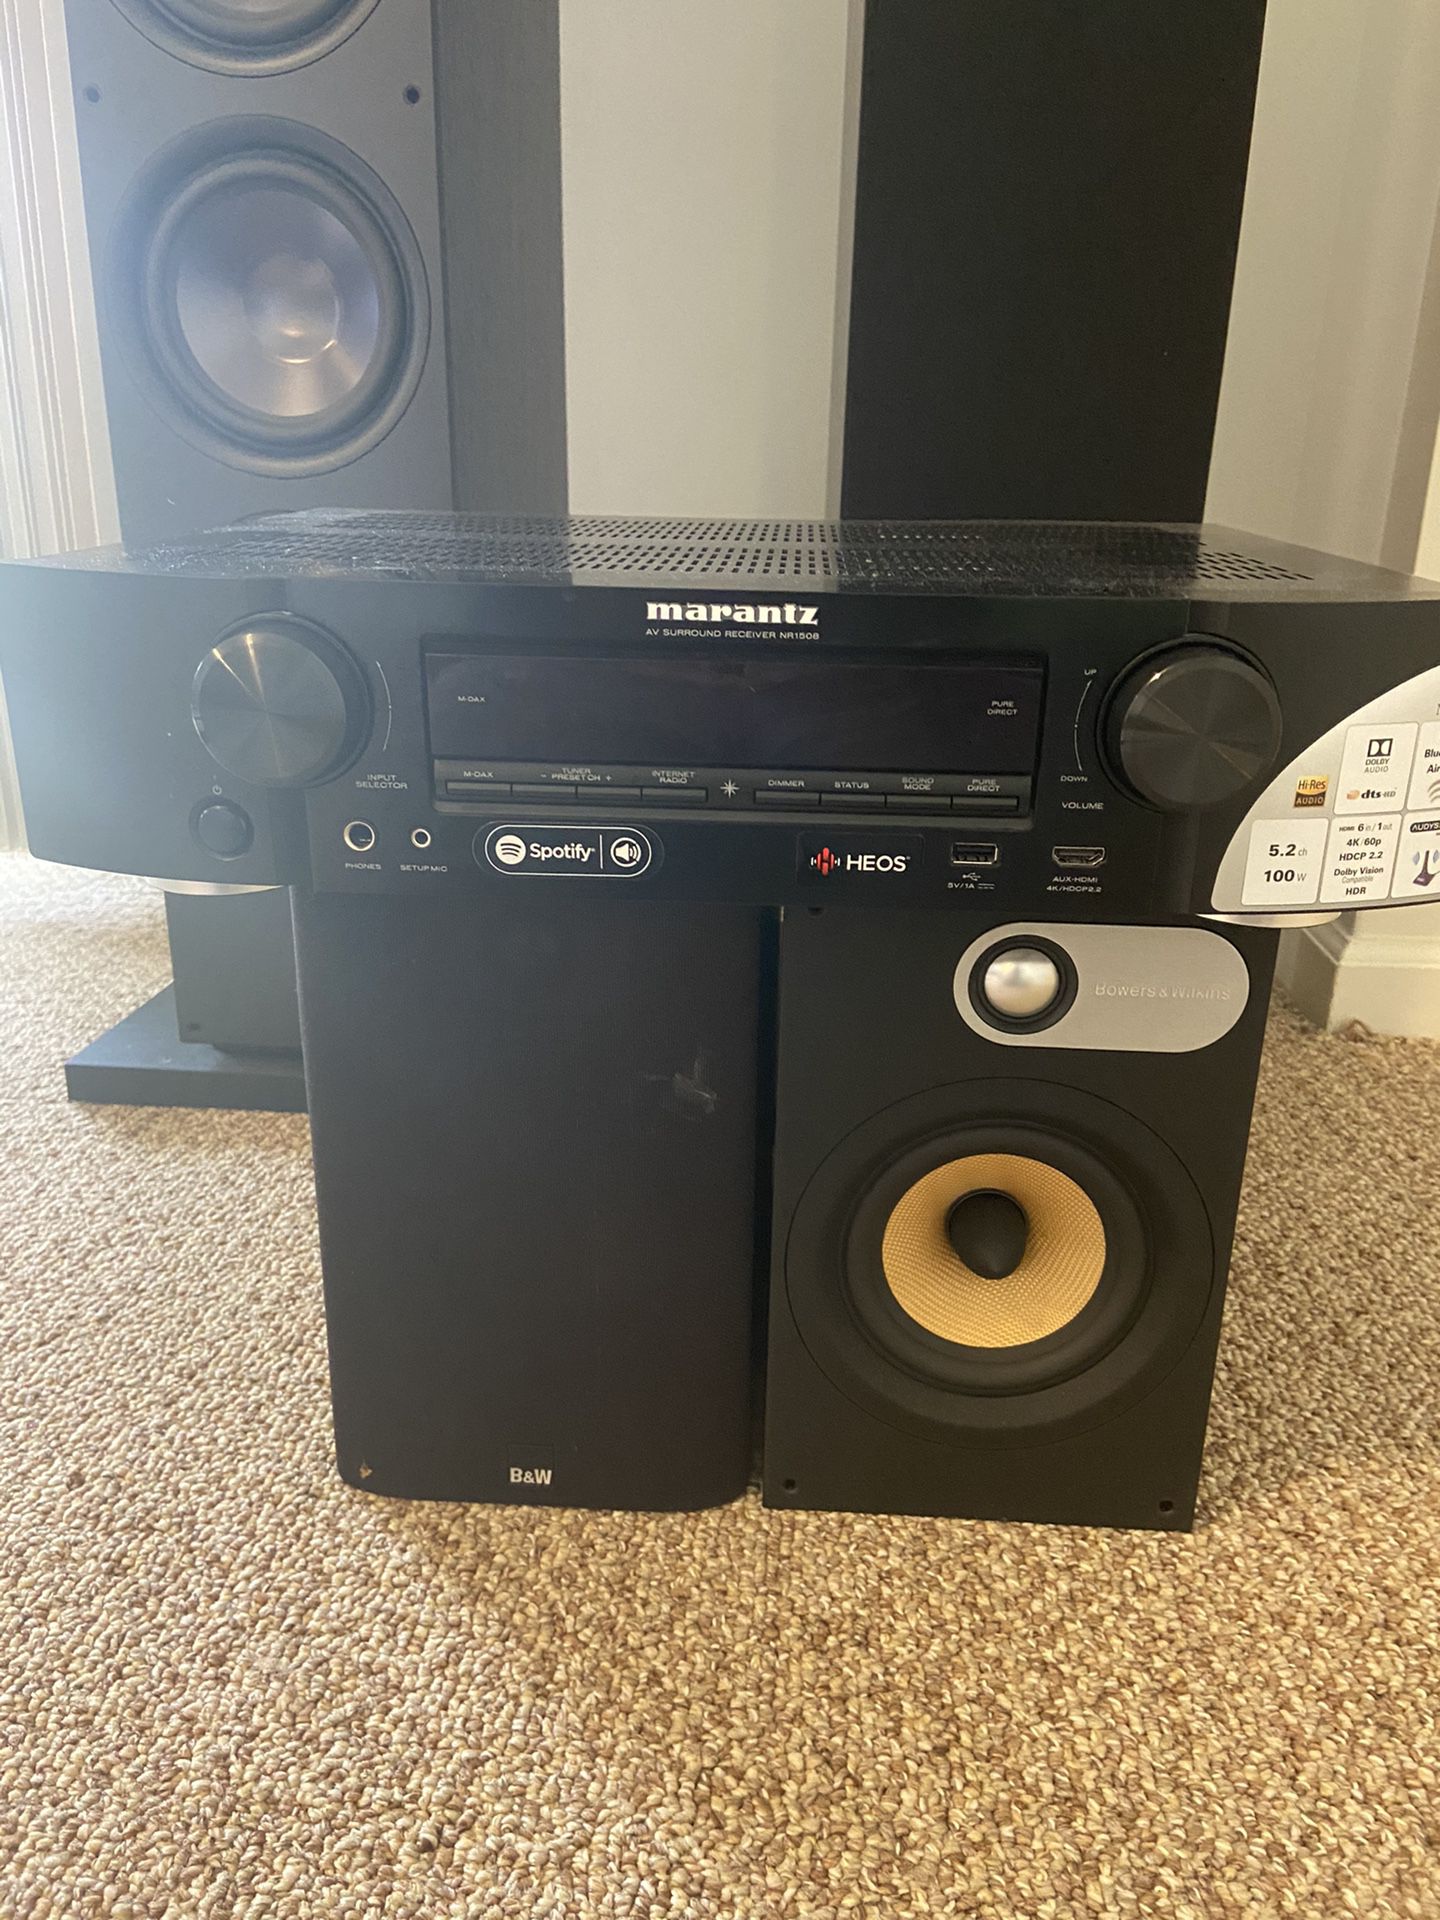 Bowers & Wilkins (600 Series) complete home theater system for sale